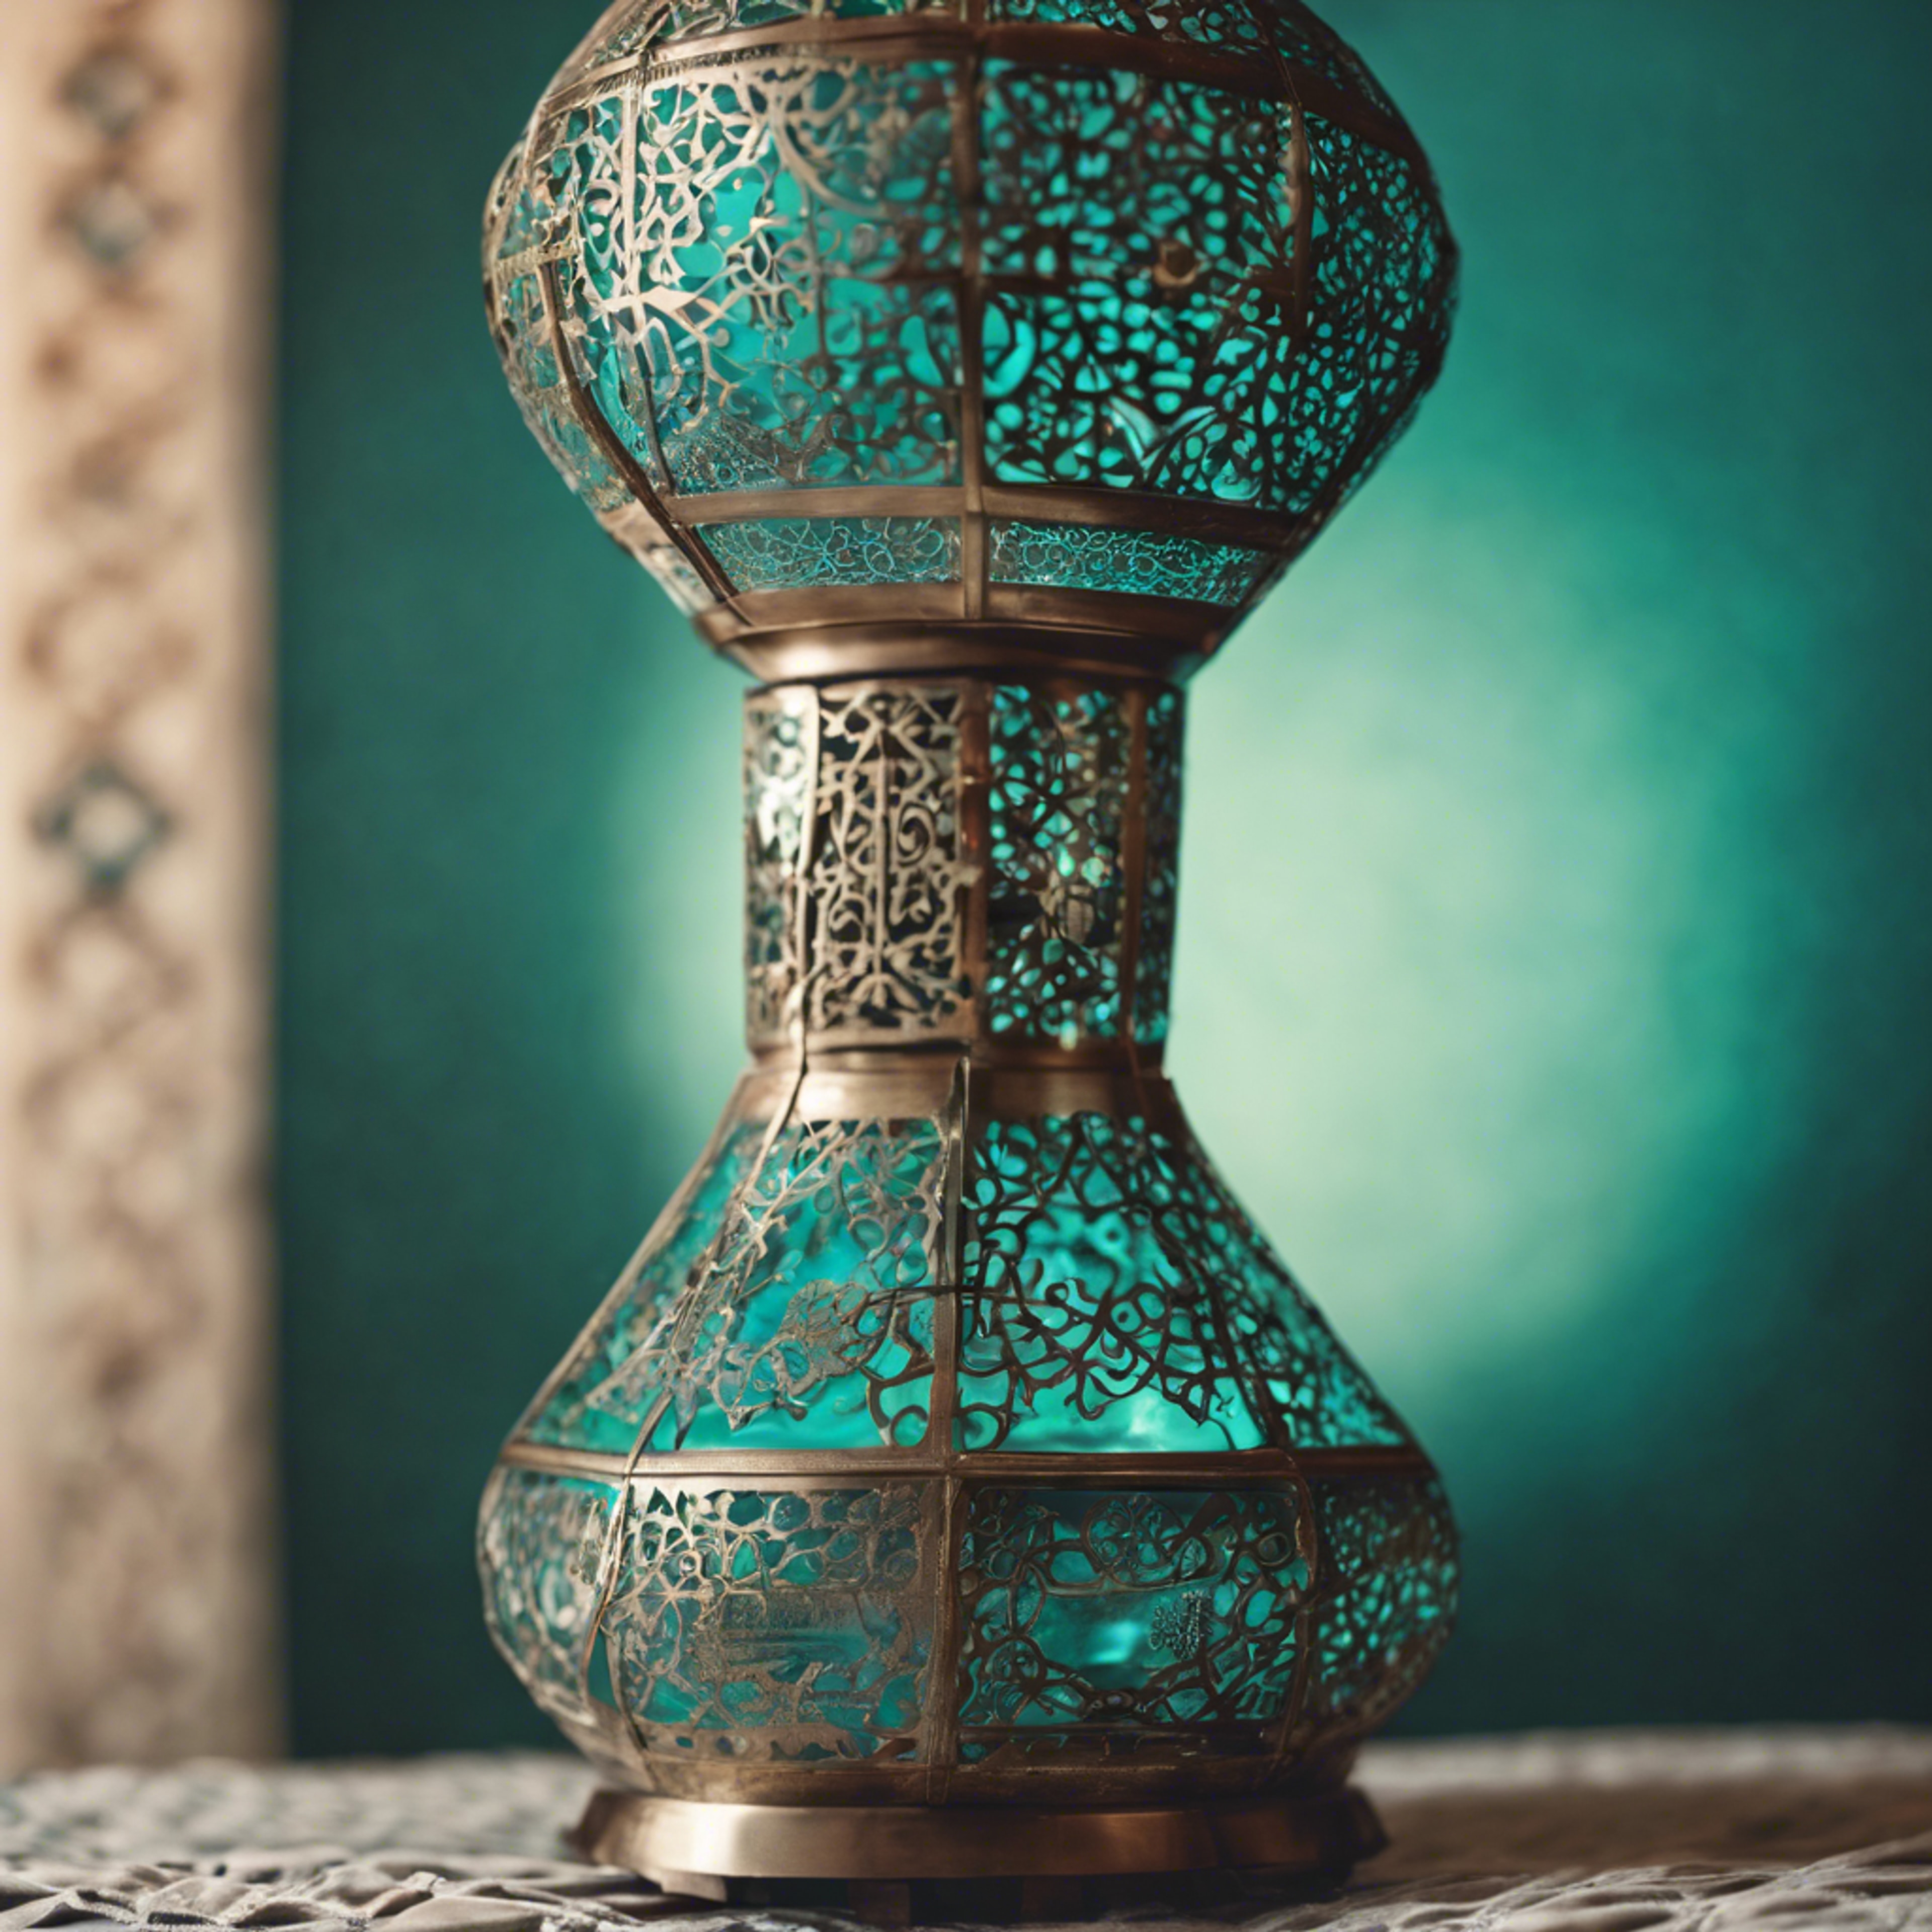 A traditional Moroccan lamp in a cool teal color.壁紙[a27f0371dbce4744aca5]